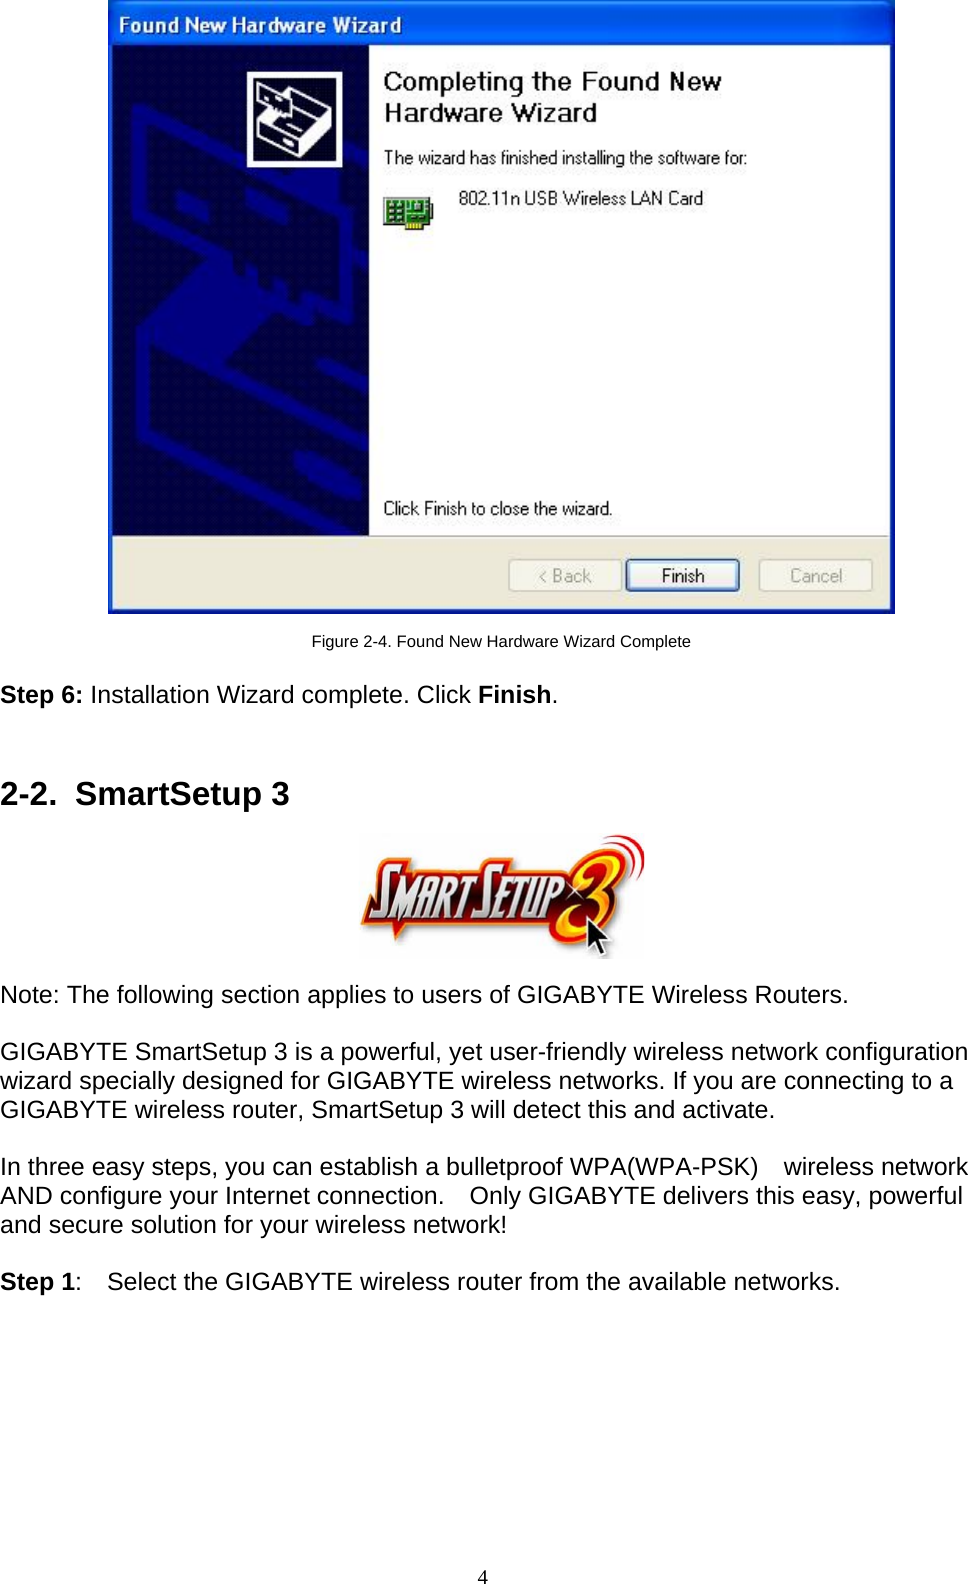 4     Figure 2-4. Found New Hardware Wizard Complete  Step 6: Installation Wizard complete. Click Finish.   2-2. SmartSetup 3     Note: The following section applies to users of GIGABYTE Wireless Routers.  GIGABYTE SmartSetup 3 is a powerful, yet user-friendly wireless network configuration wizard specially designed for GIGABYTE wireless networks. If you are connecting to a GIGABYTE wireless router, SmartSetup 3 will detect this and activate.      In three easy steps, you can establish a bulletproof WPA(WPA-PSK)  wireless network AND configure your Internet connection.    Only GIGABYTE delivers this easy, powerful and secure solution for your wireless network!  Step 1:    Select the GIGABYTE wireless router from the available networks.  